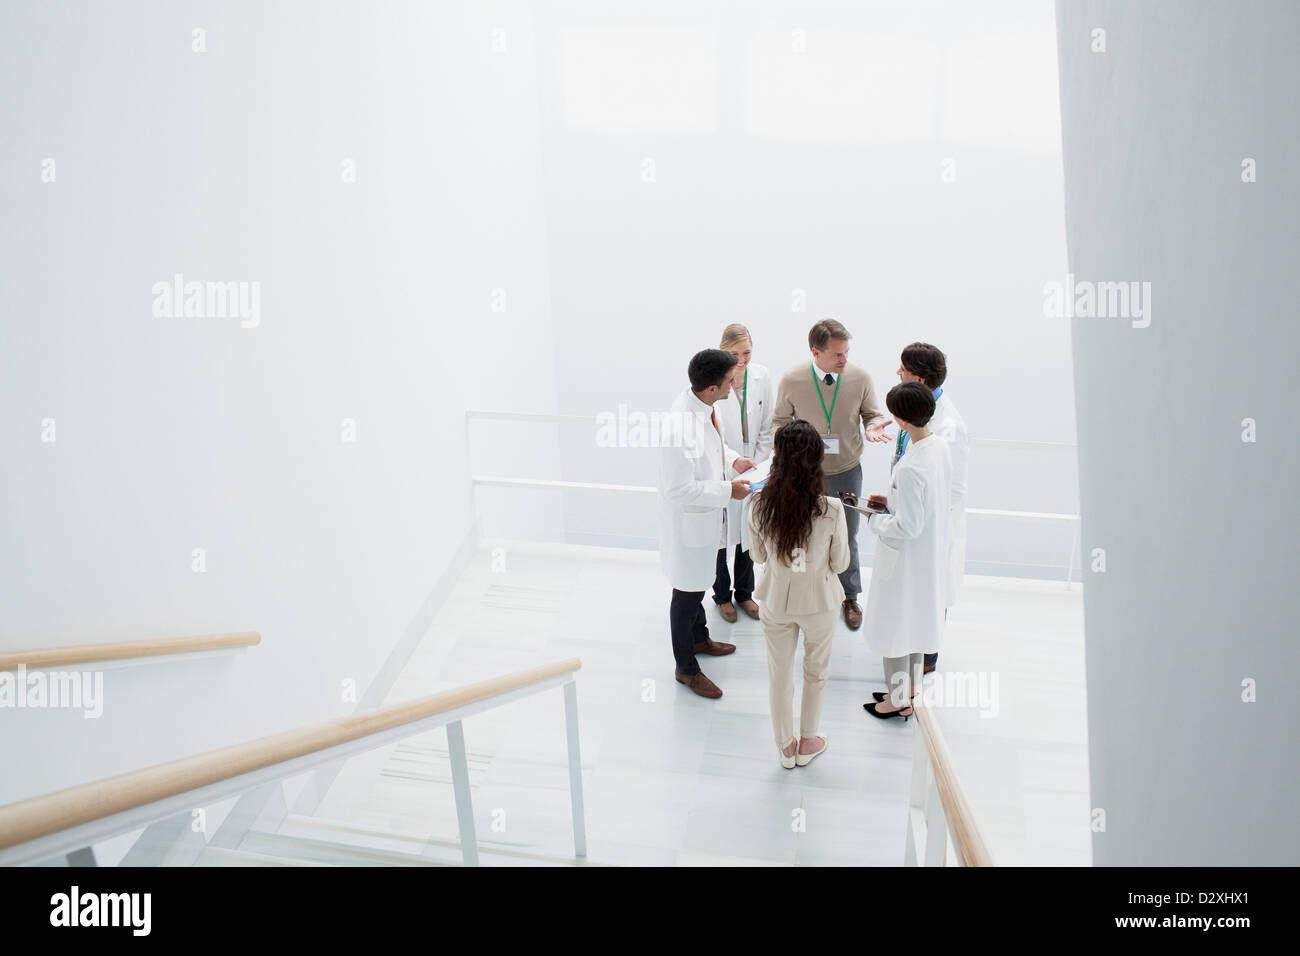 Business people and doctors on landing of stairs Stock Photo